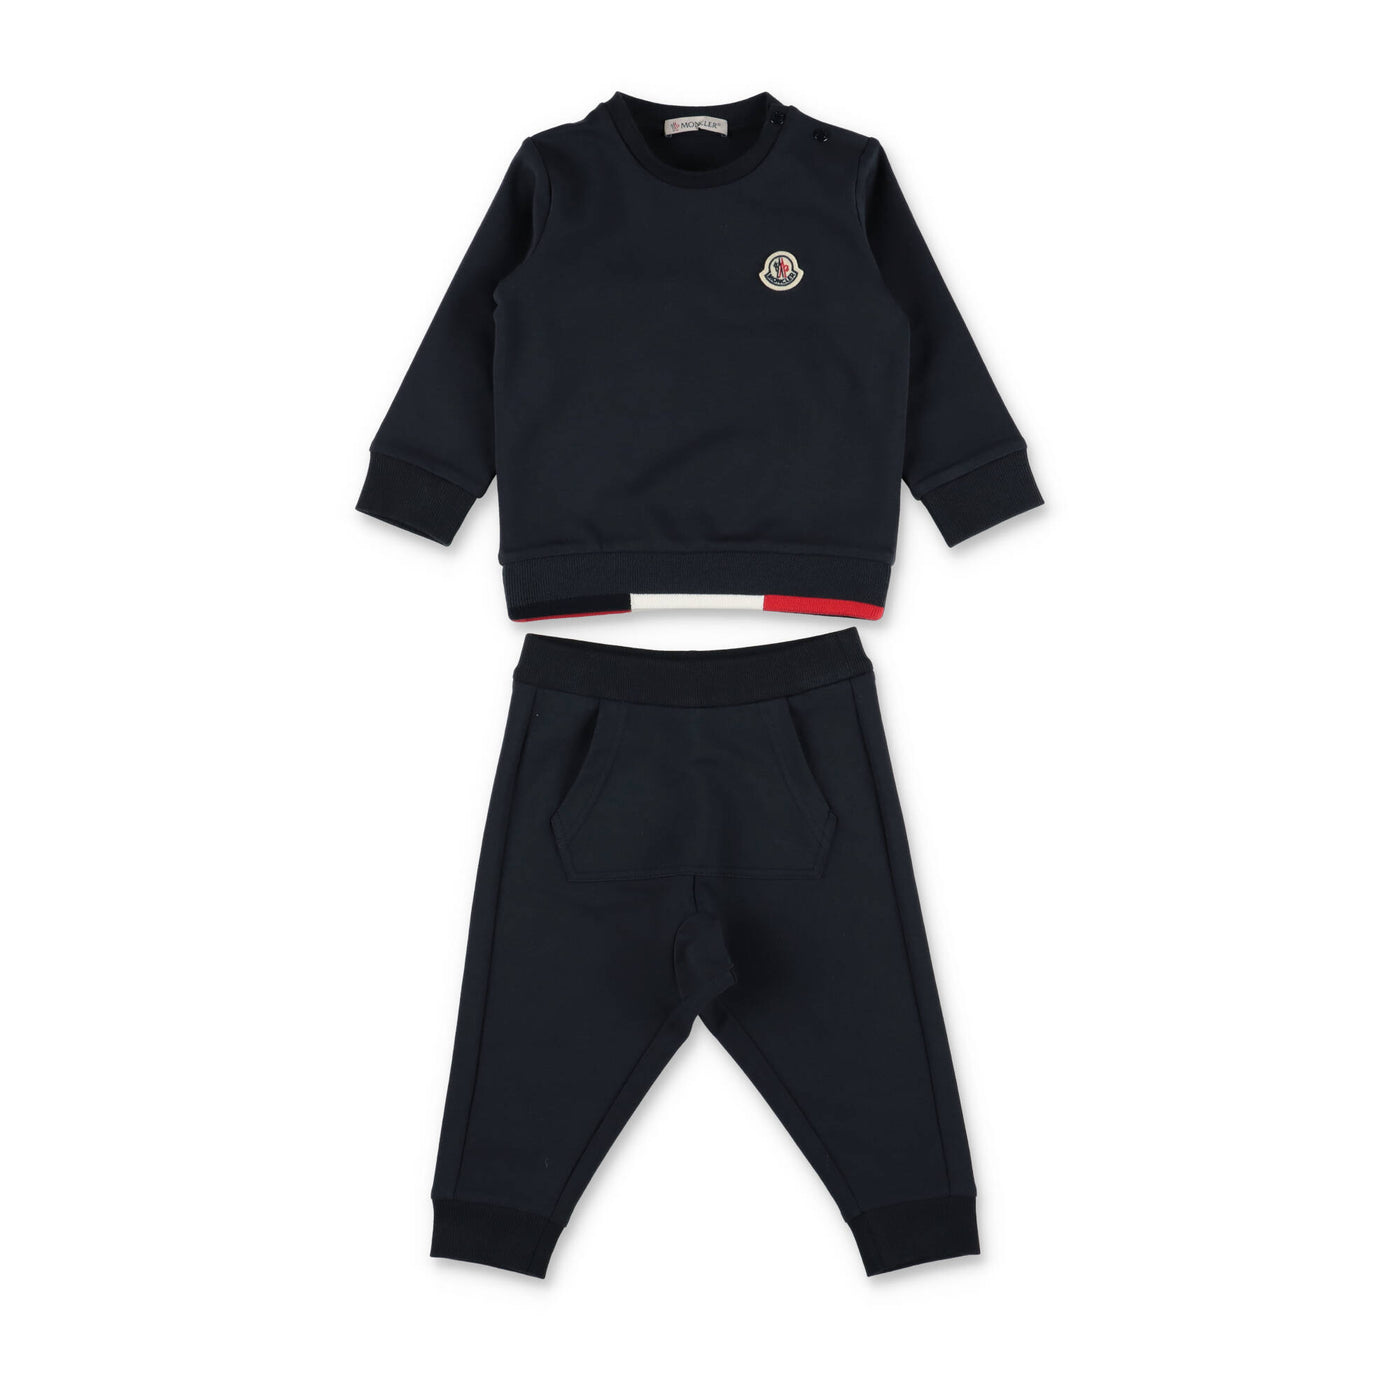 Navy blue cotton baby boy MONCLER outfit with sweatshirt and pants